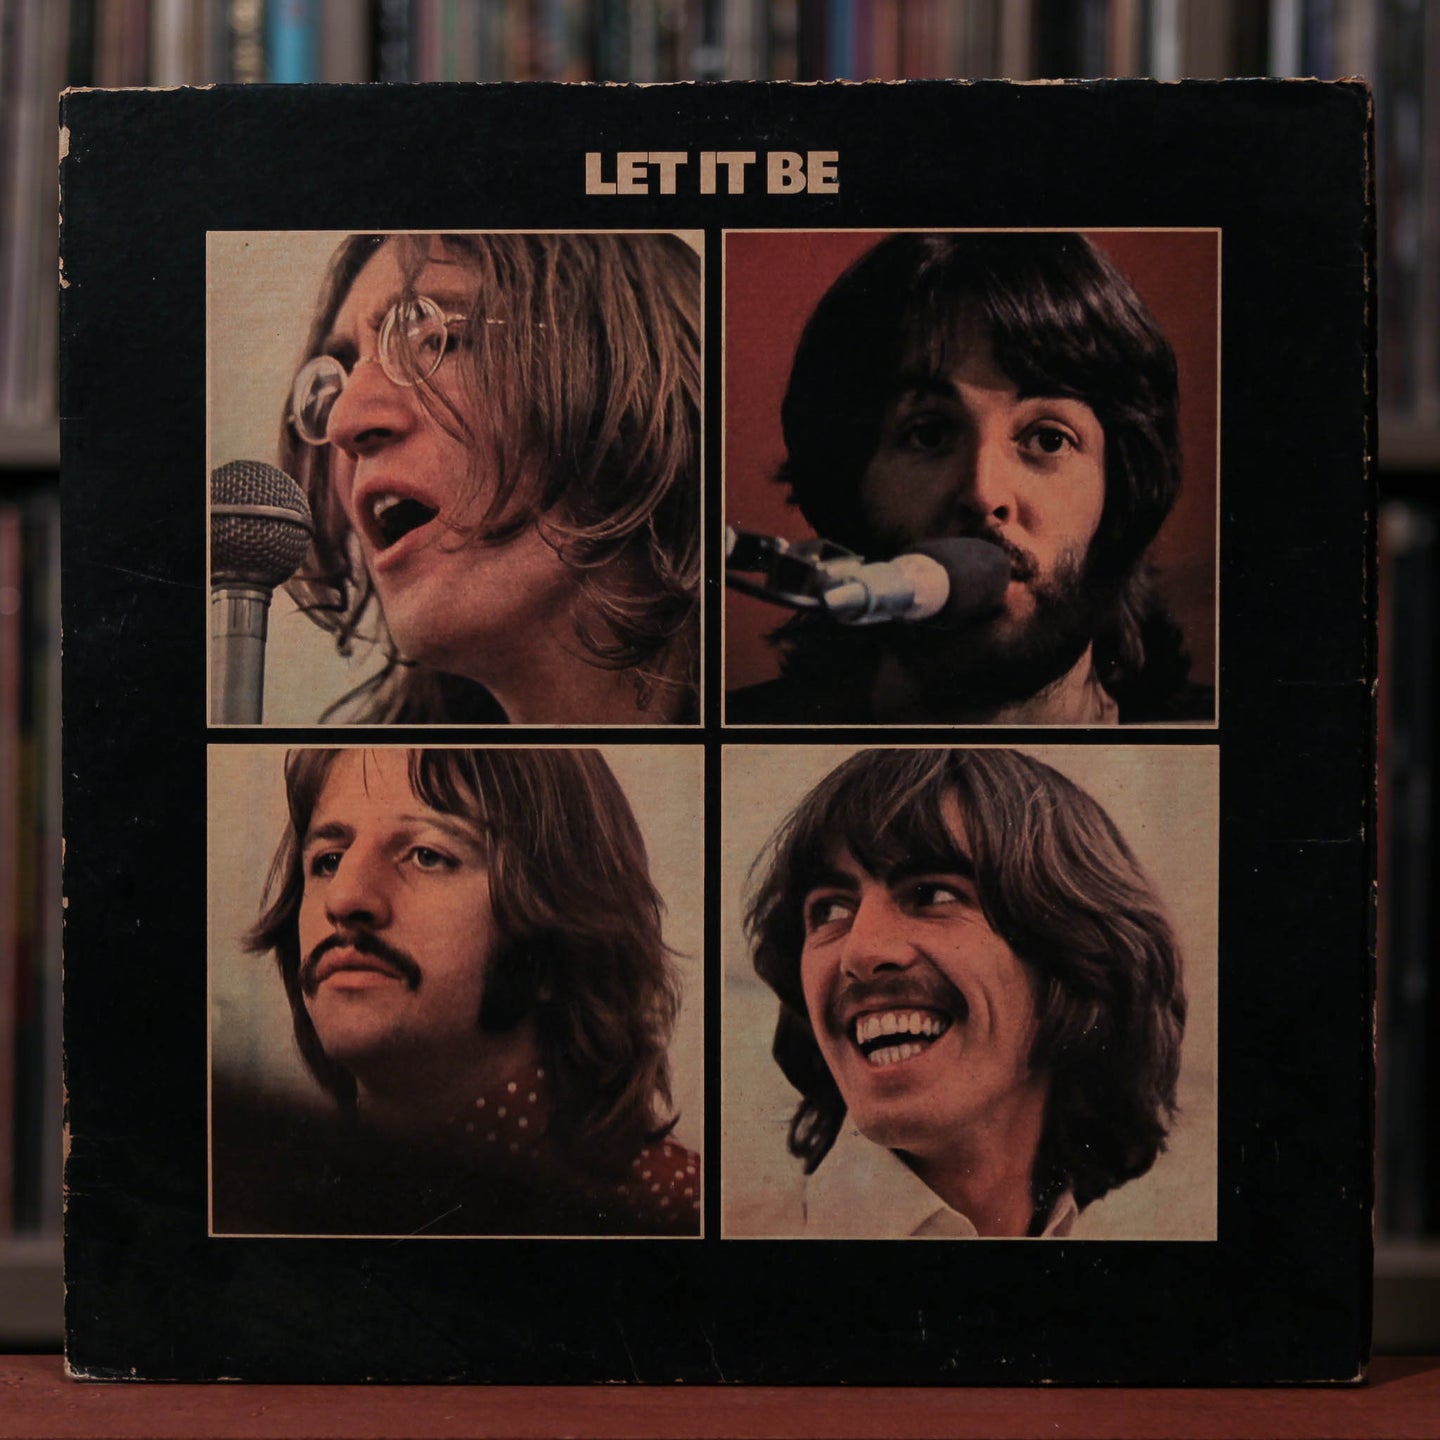 The Beatles - Let it Be - 1970 Apple, VG/VG